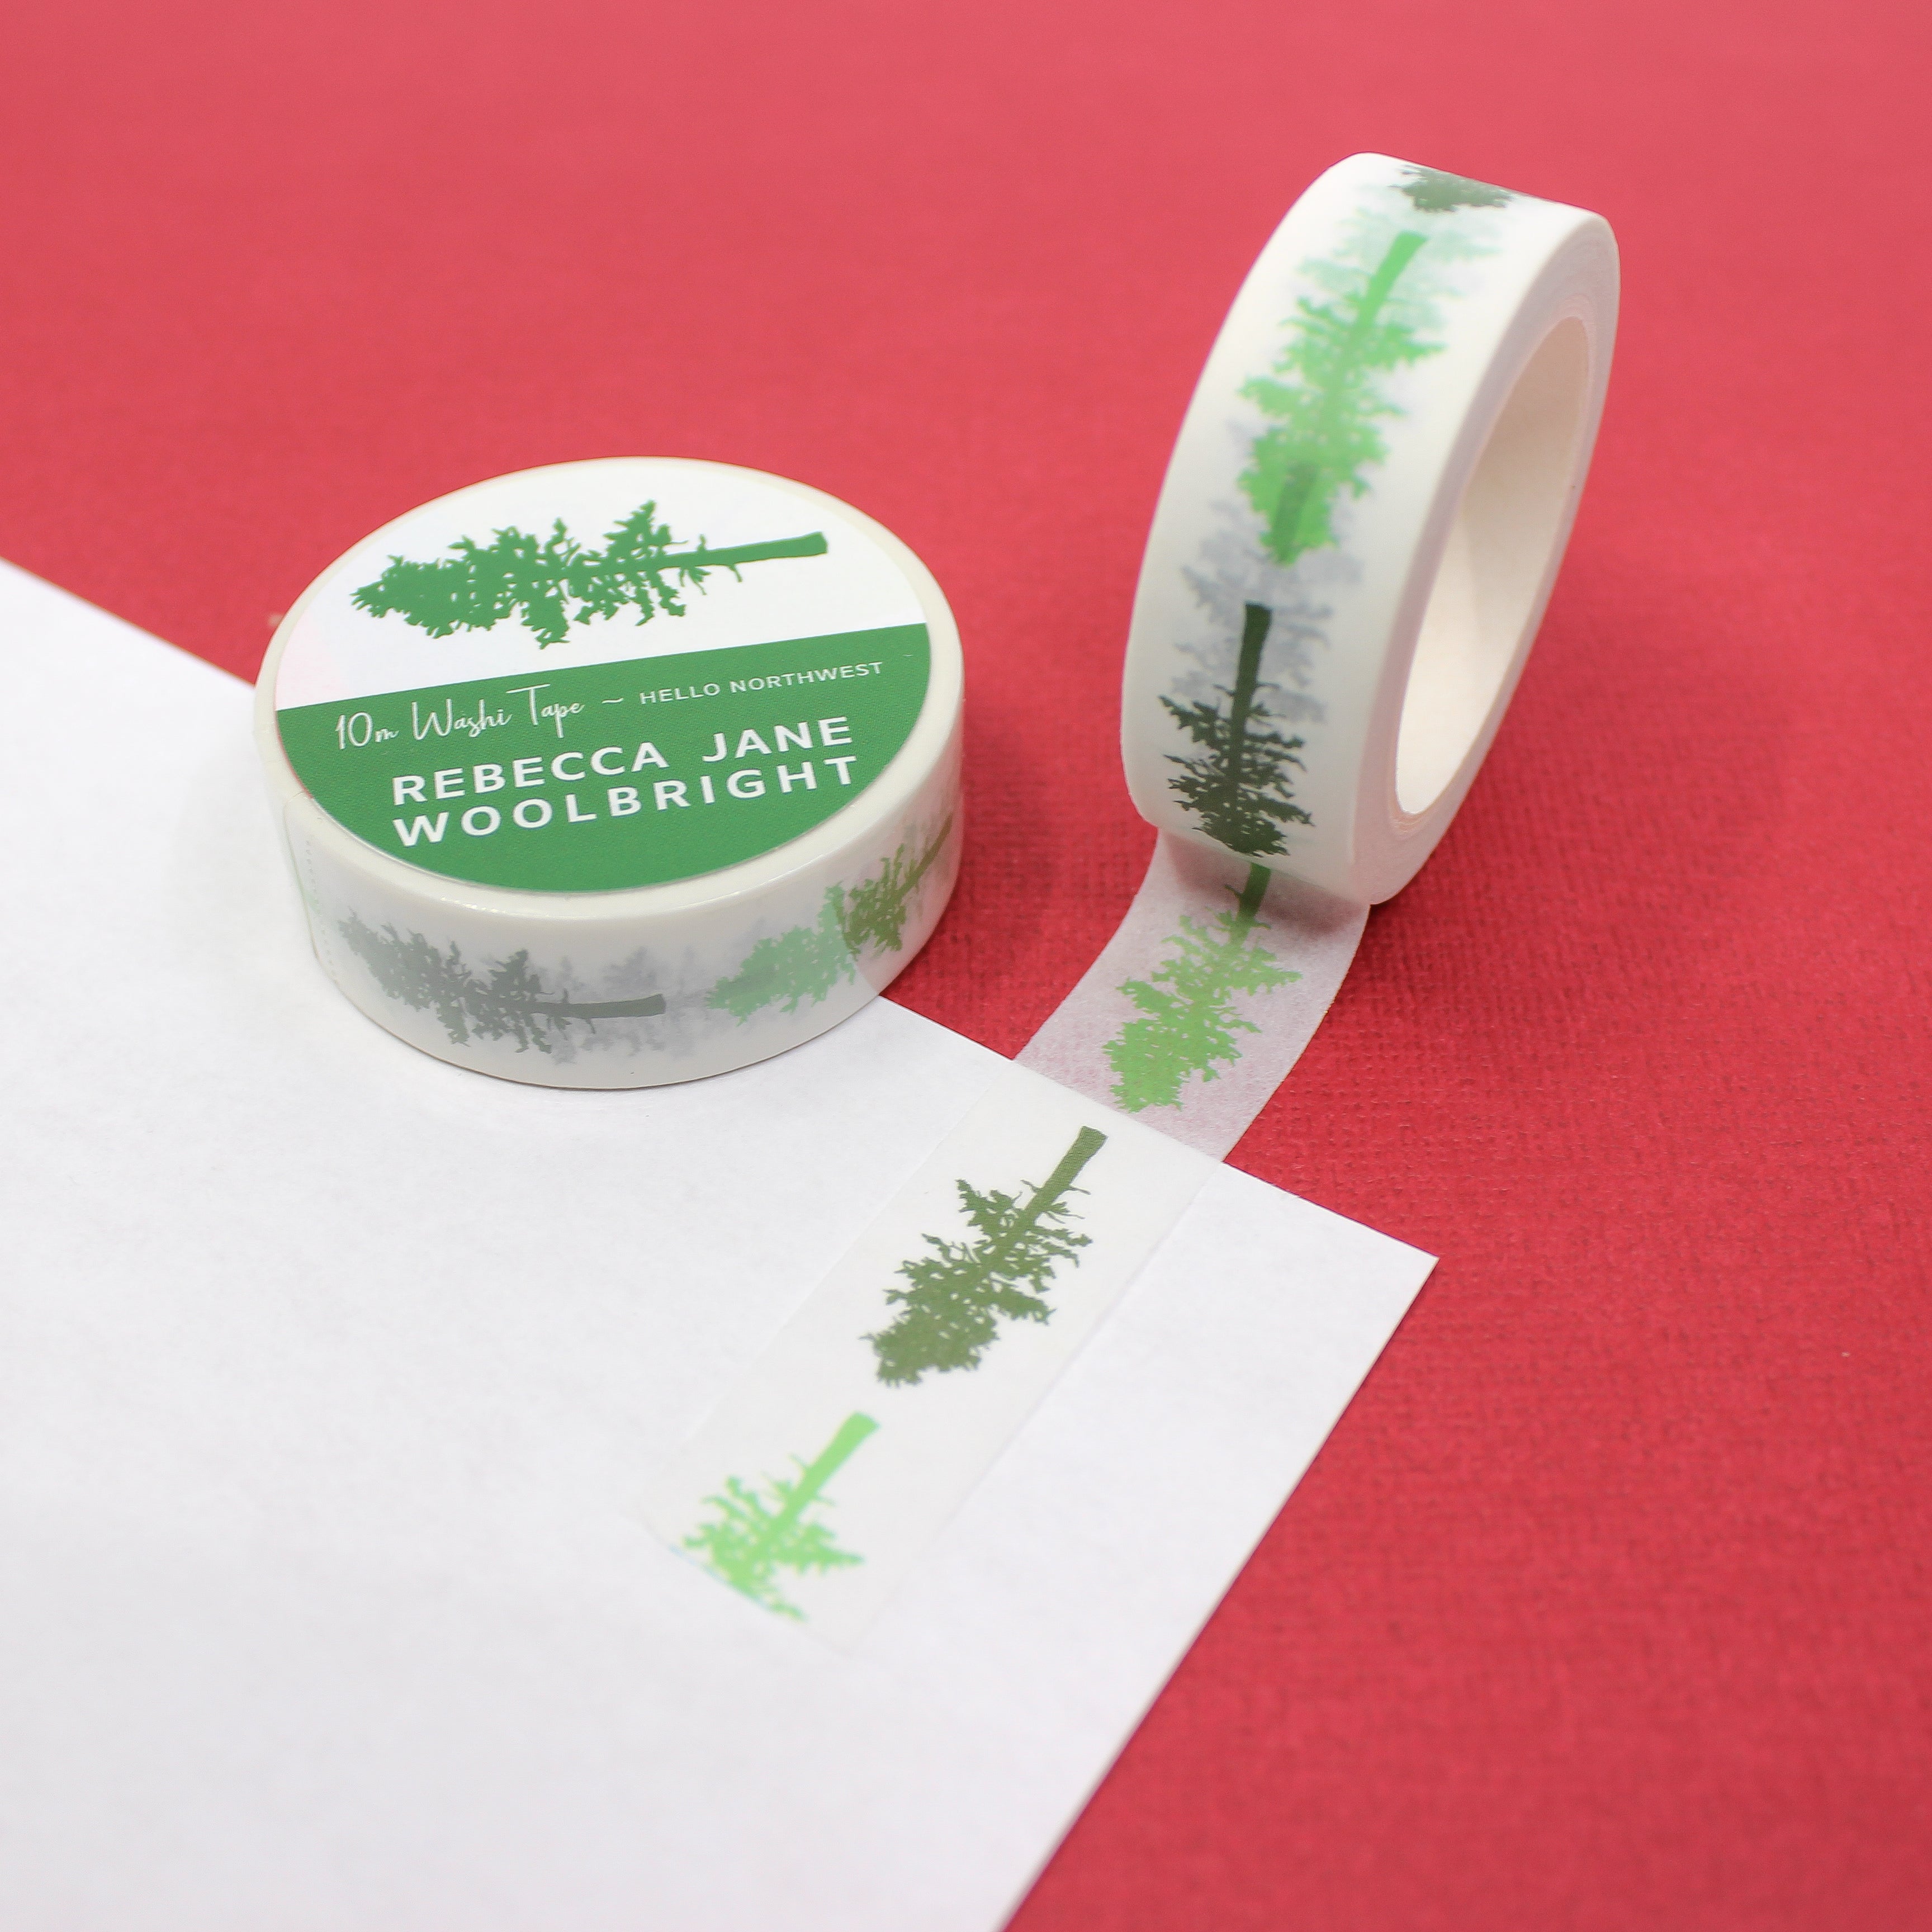 This is a green northwest pine trees view themed washi tape from BBB Supplies Craft Shop